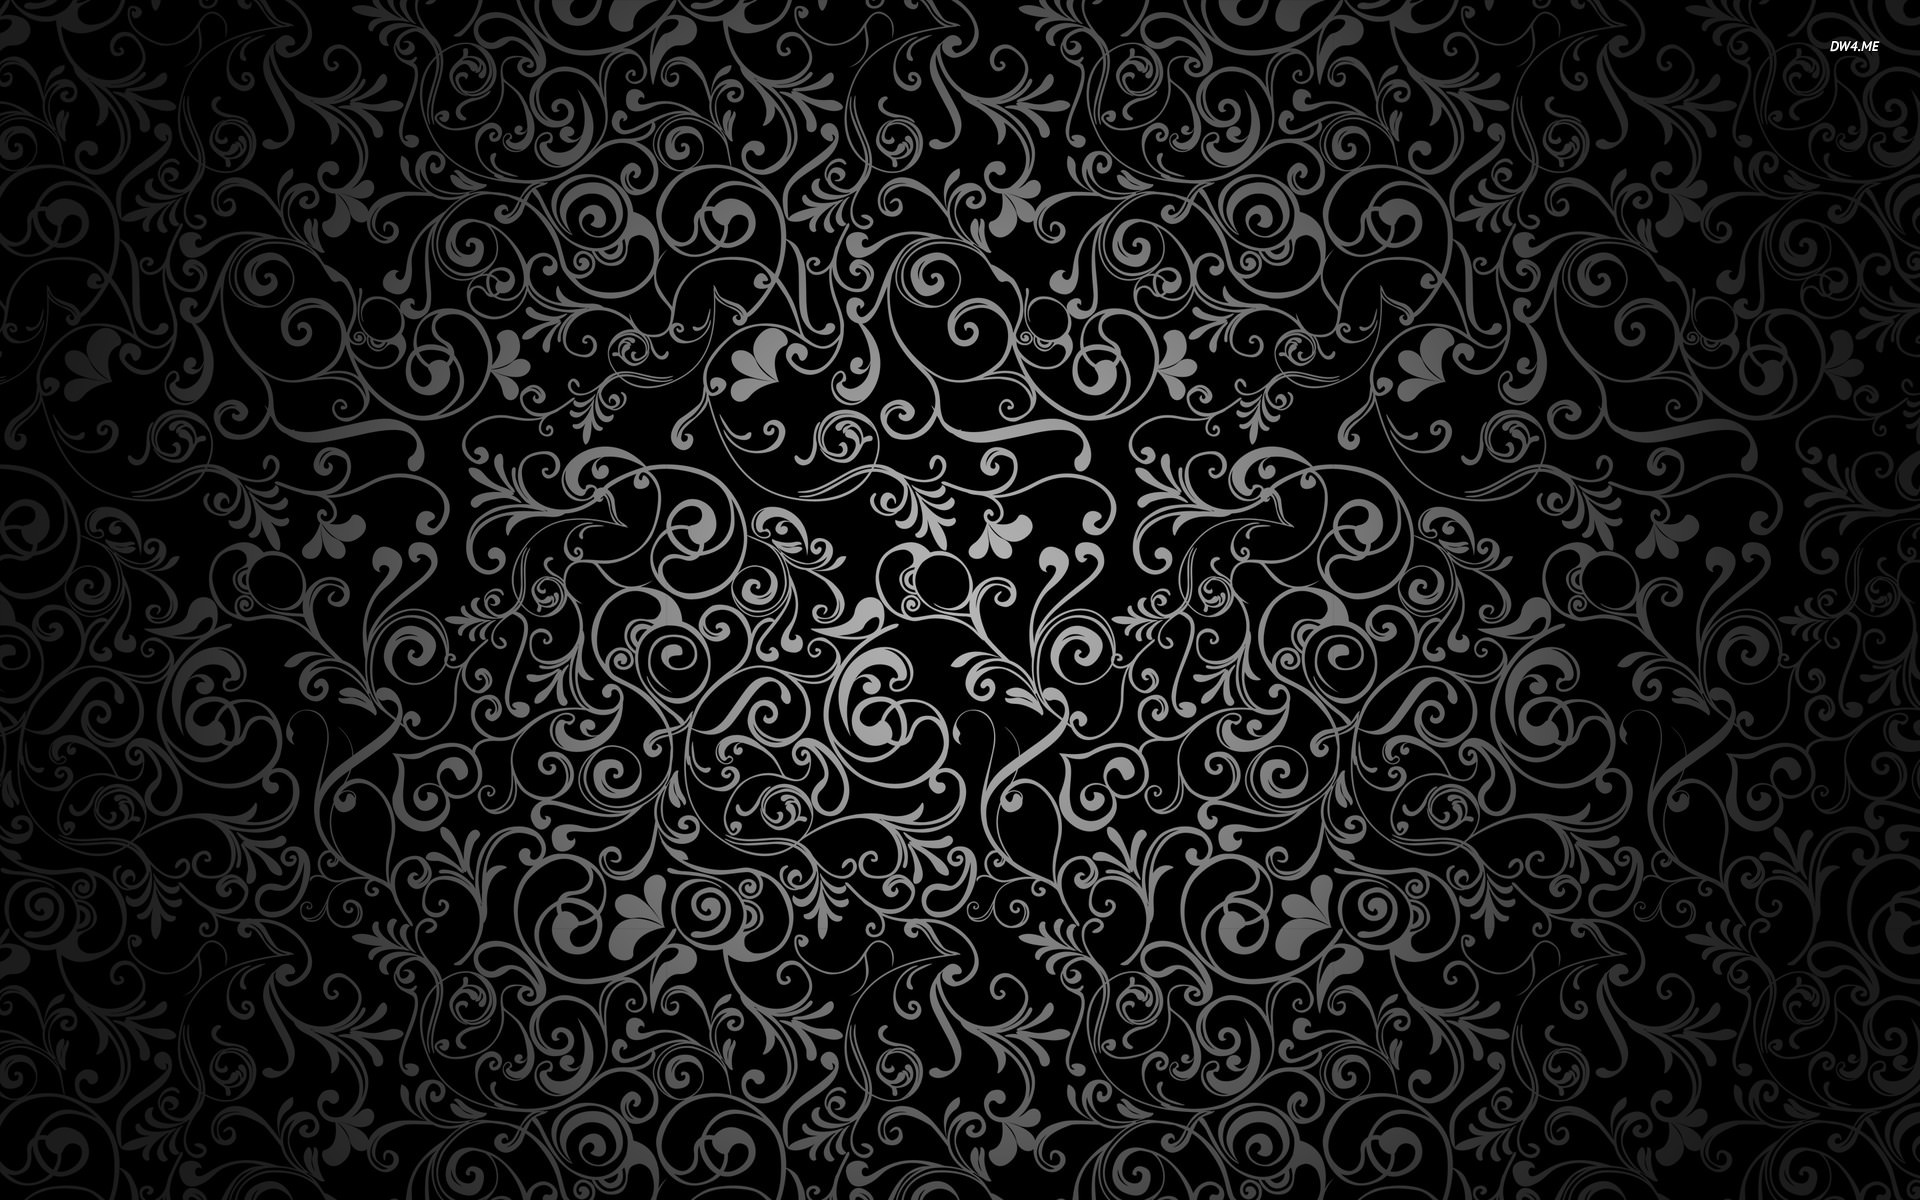 Black & White Floral Wallpapers | Floral Patterns ...